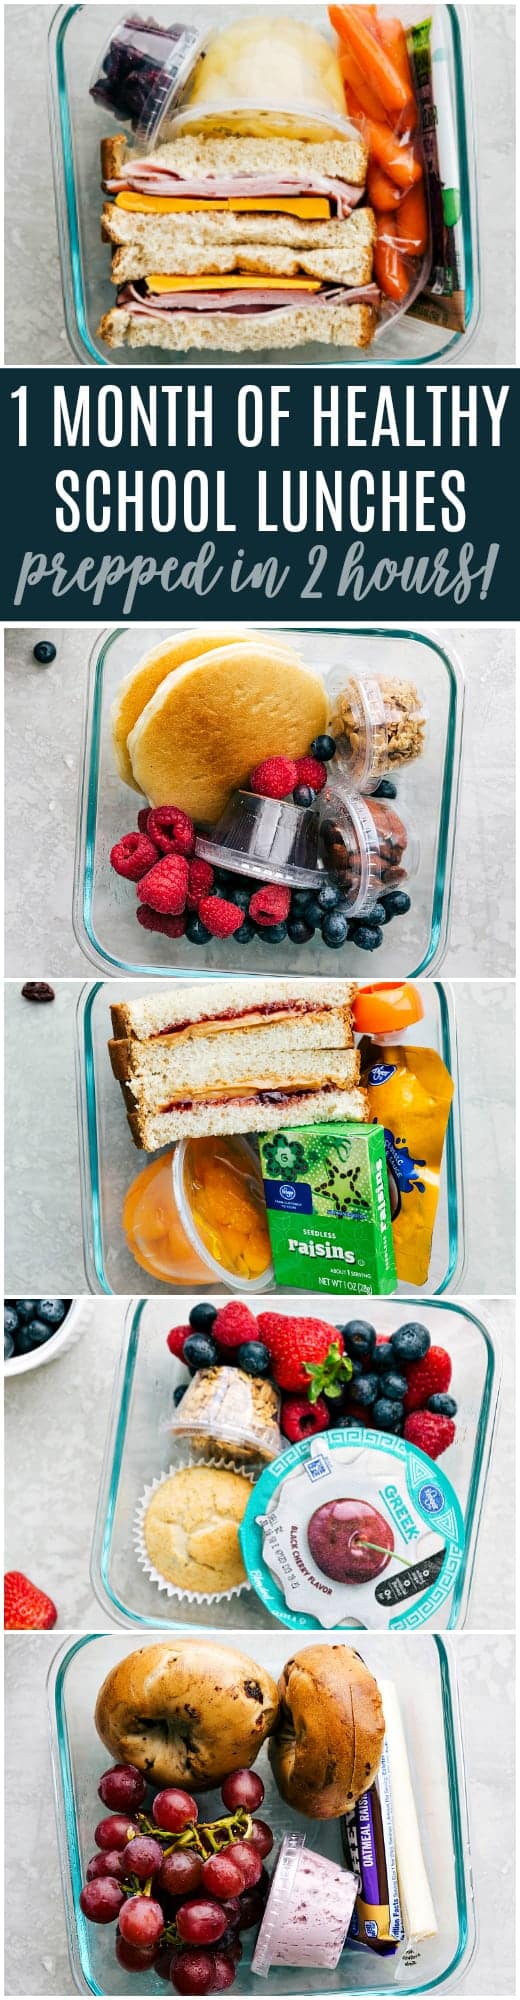 One trip to your grocery store and you can make enough healthy school lunches to last for a month! via chelseasmessyapron.com #school #lunch #meal #prep #healthy #easy #quick #ideas #prepahead #sandwich #freeze #freezersandwich #parfait #bagel #ham #cheddar #healthy #snacks